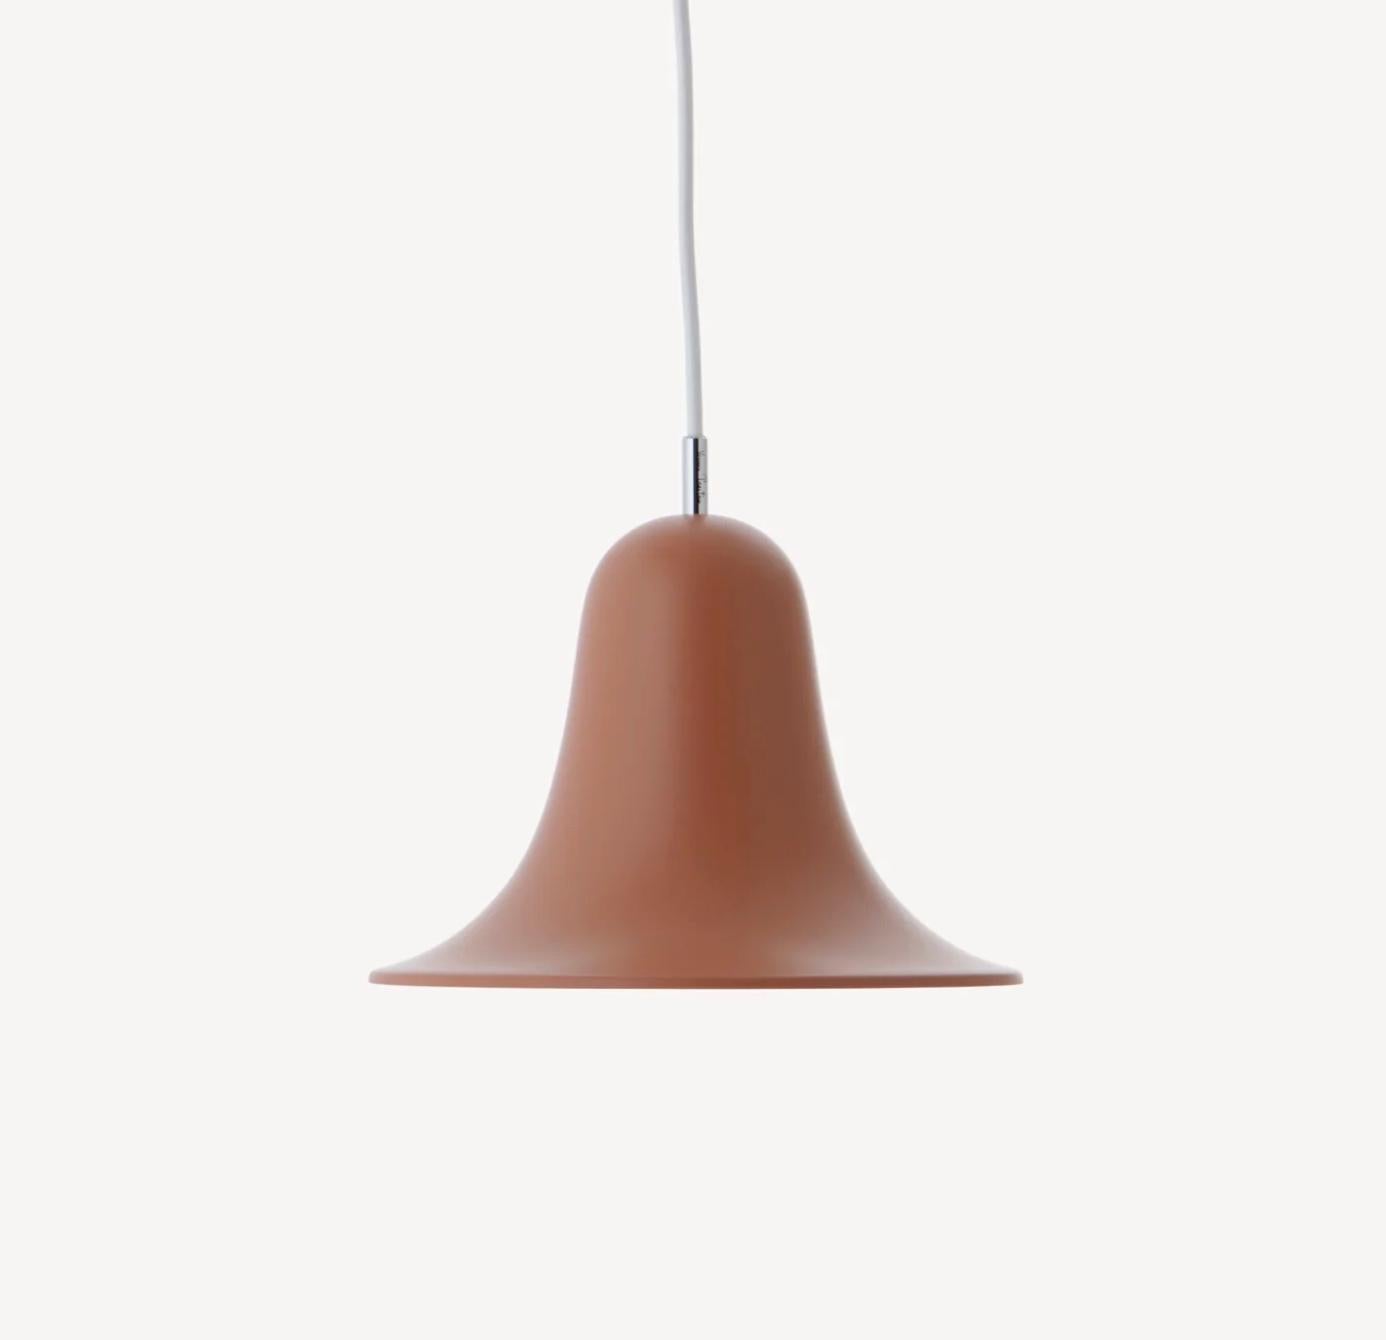 Verner Panton Pantop Ø23 pendant. Designed in 1980, current production.

The elegant Pantop line was designed by Verner Panton in 1980, and has for a long time been a staple of the Verpan collection. Pantop is characterized by a bell-like, widely